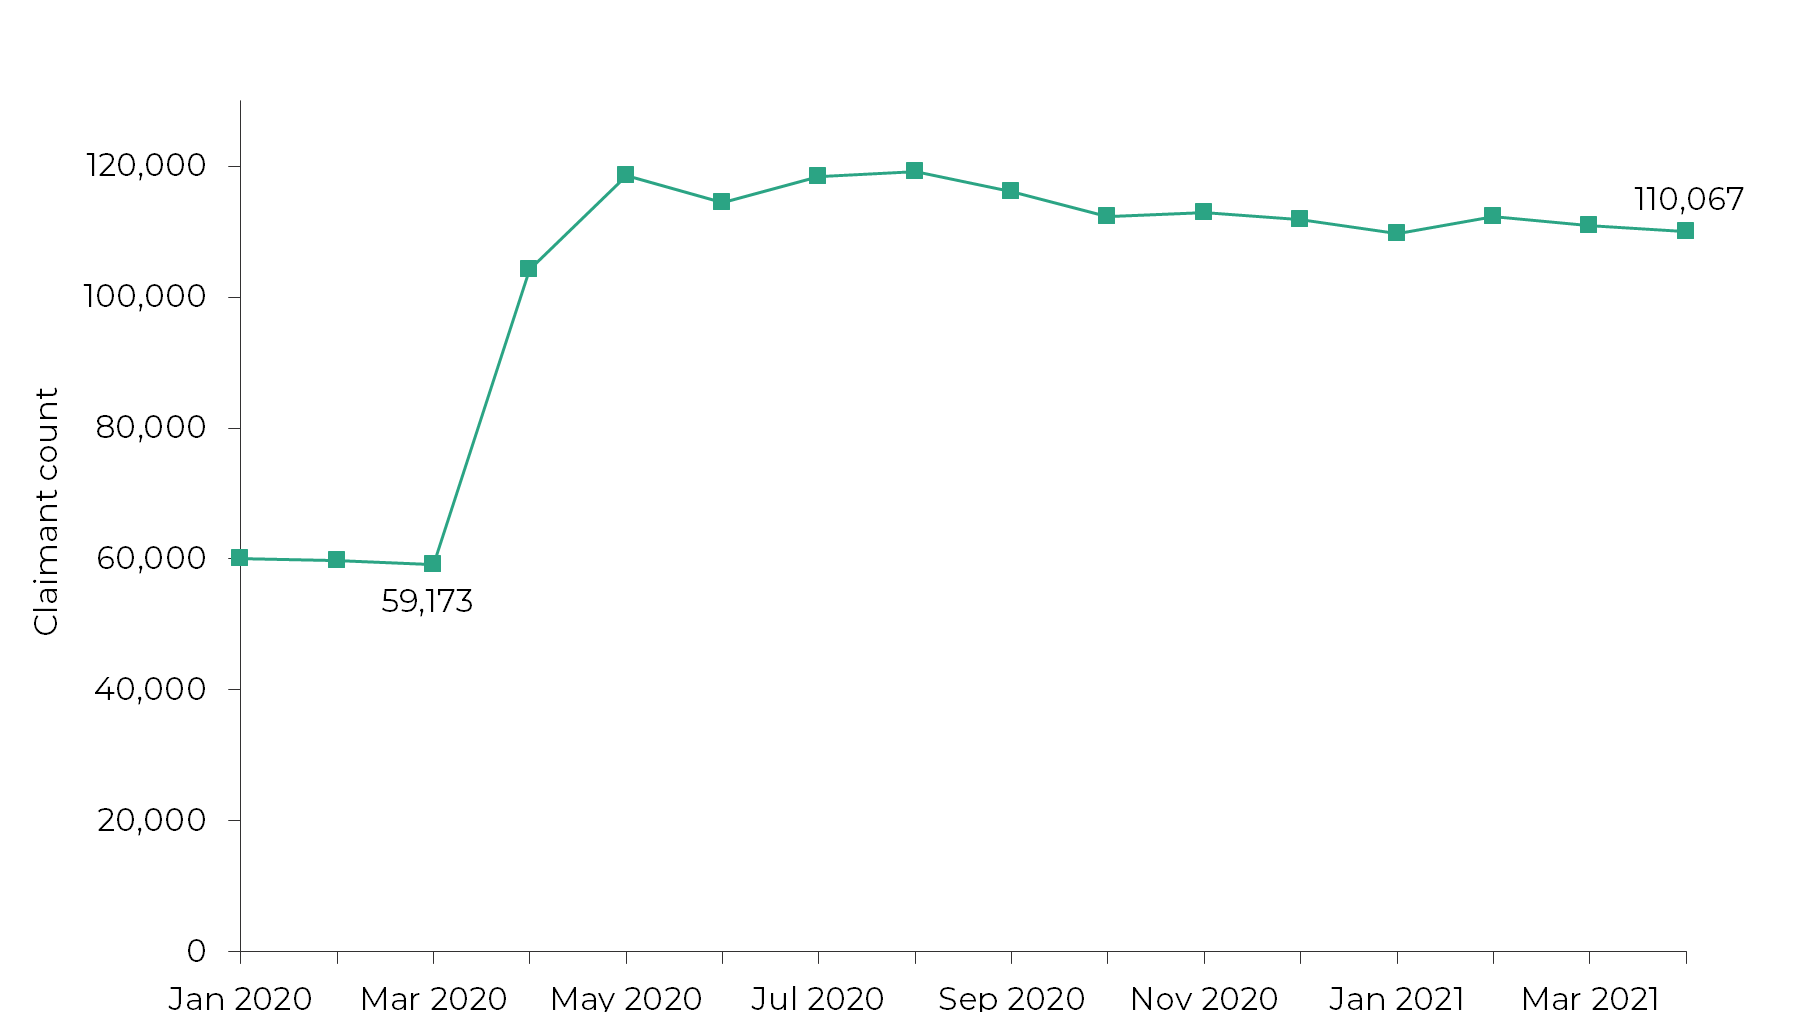 Graph showing the claimant count in Wales doubled at the start of the pandemic, and has decreased slightly since. The claimant count increased from 59,173 in March 2020 to 110,067 in April 2021.